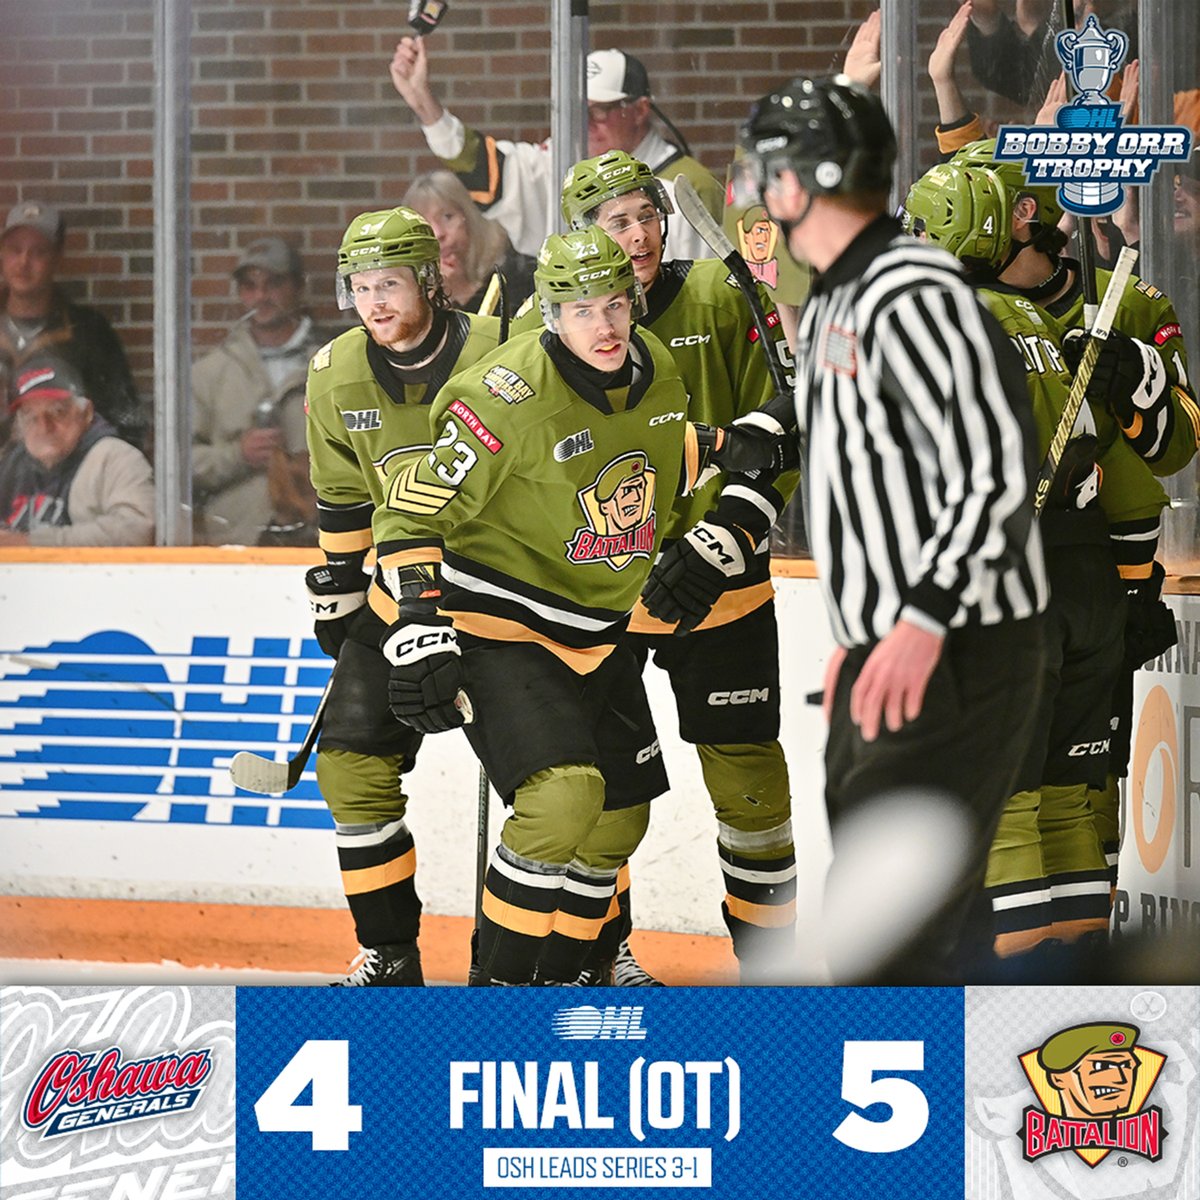 The @OHLBattalion scored late in the third and capitalized in overtime to force Game Five in Oshawa! Sandis Vilmanis (#TimeToHunt) scored twice and added two assists to help the Battalion earn their first victory of the series. #OHLPlayoffs | #OSHvsNB